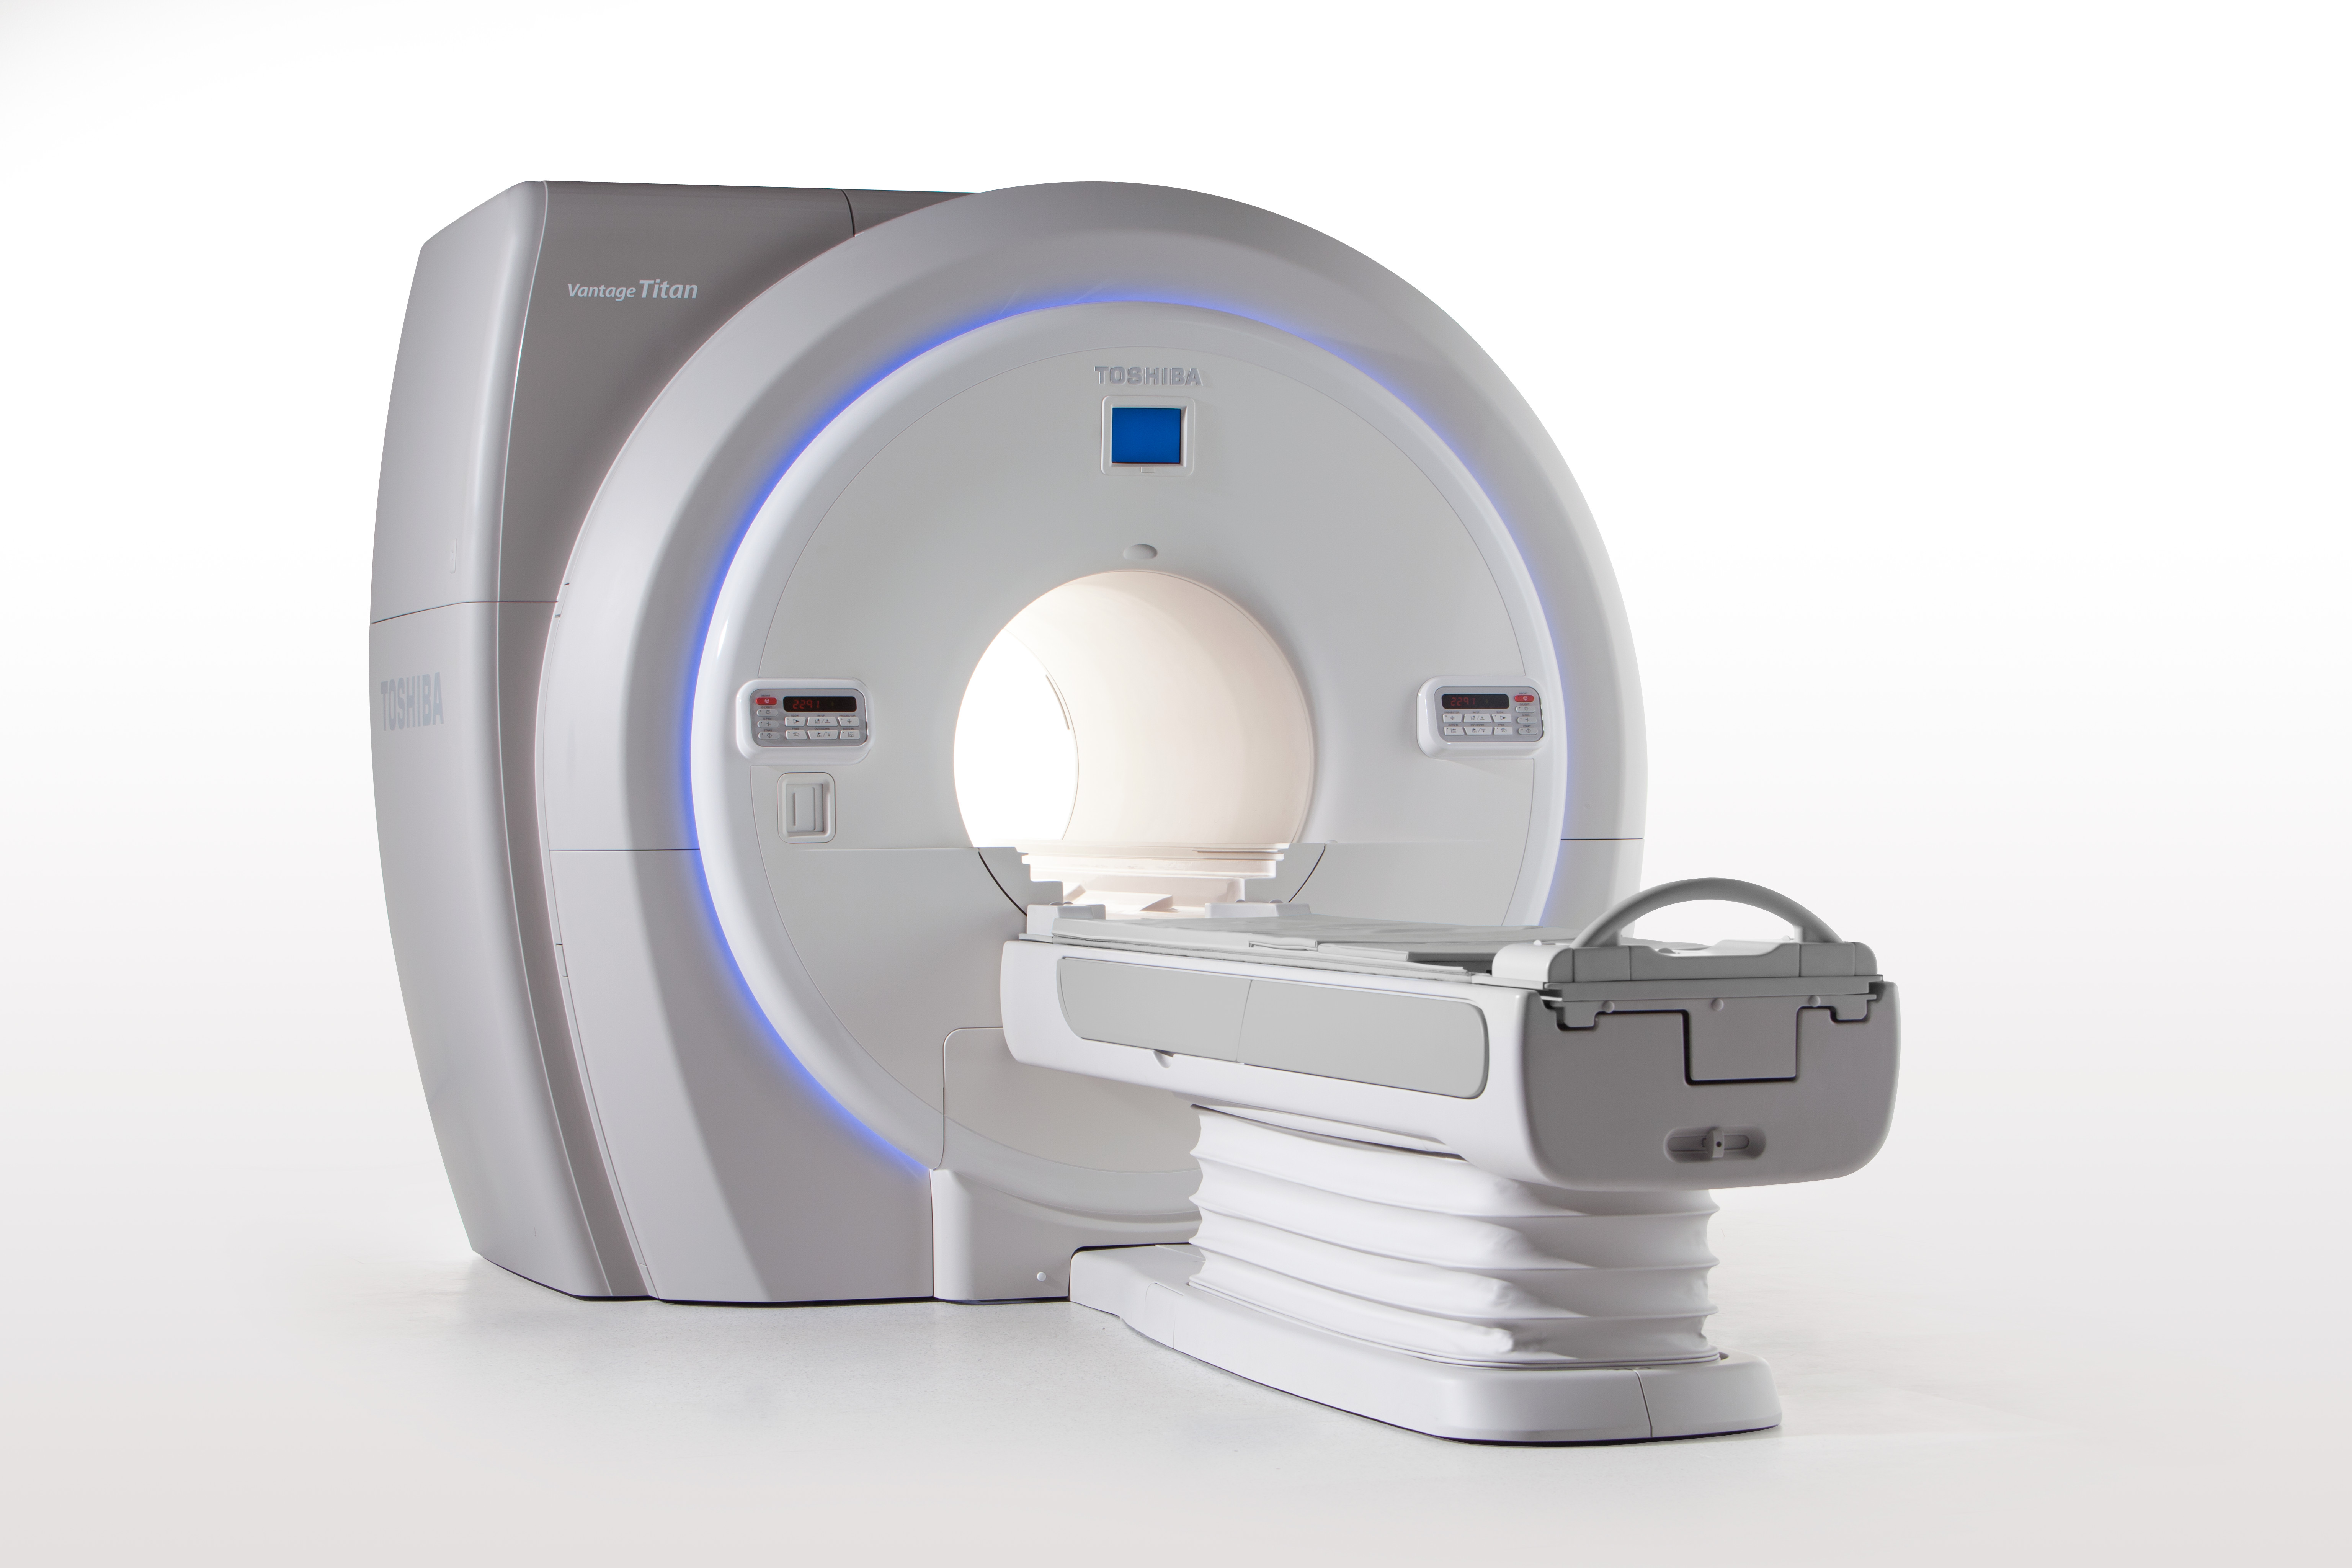 Toshiba’s Vantage Titan 1.5T MR offers patients faster, quieter, more comfortable exams. 